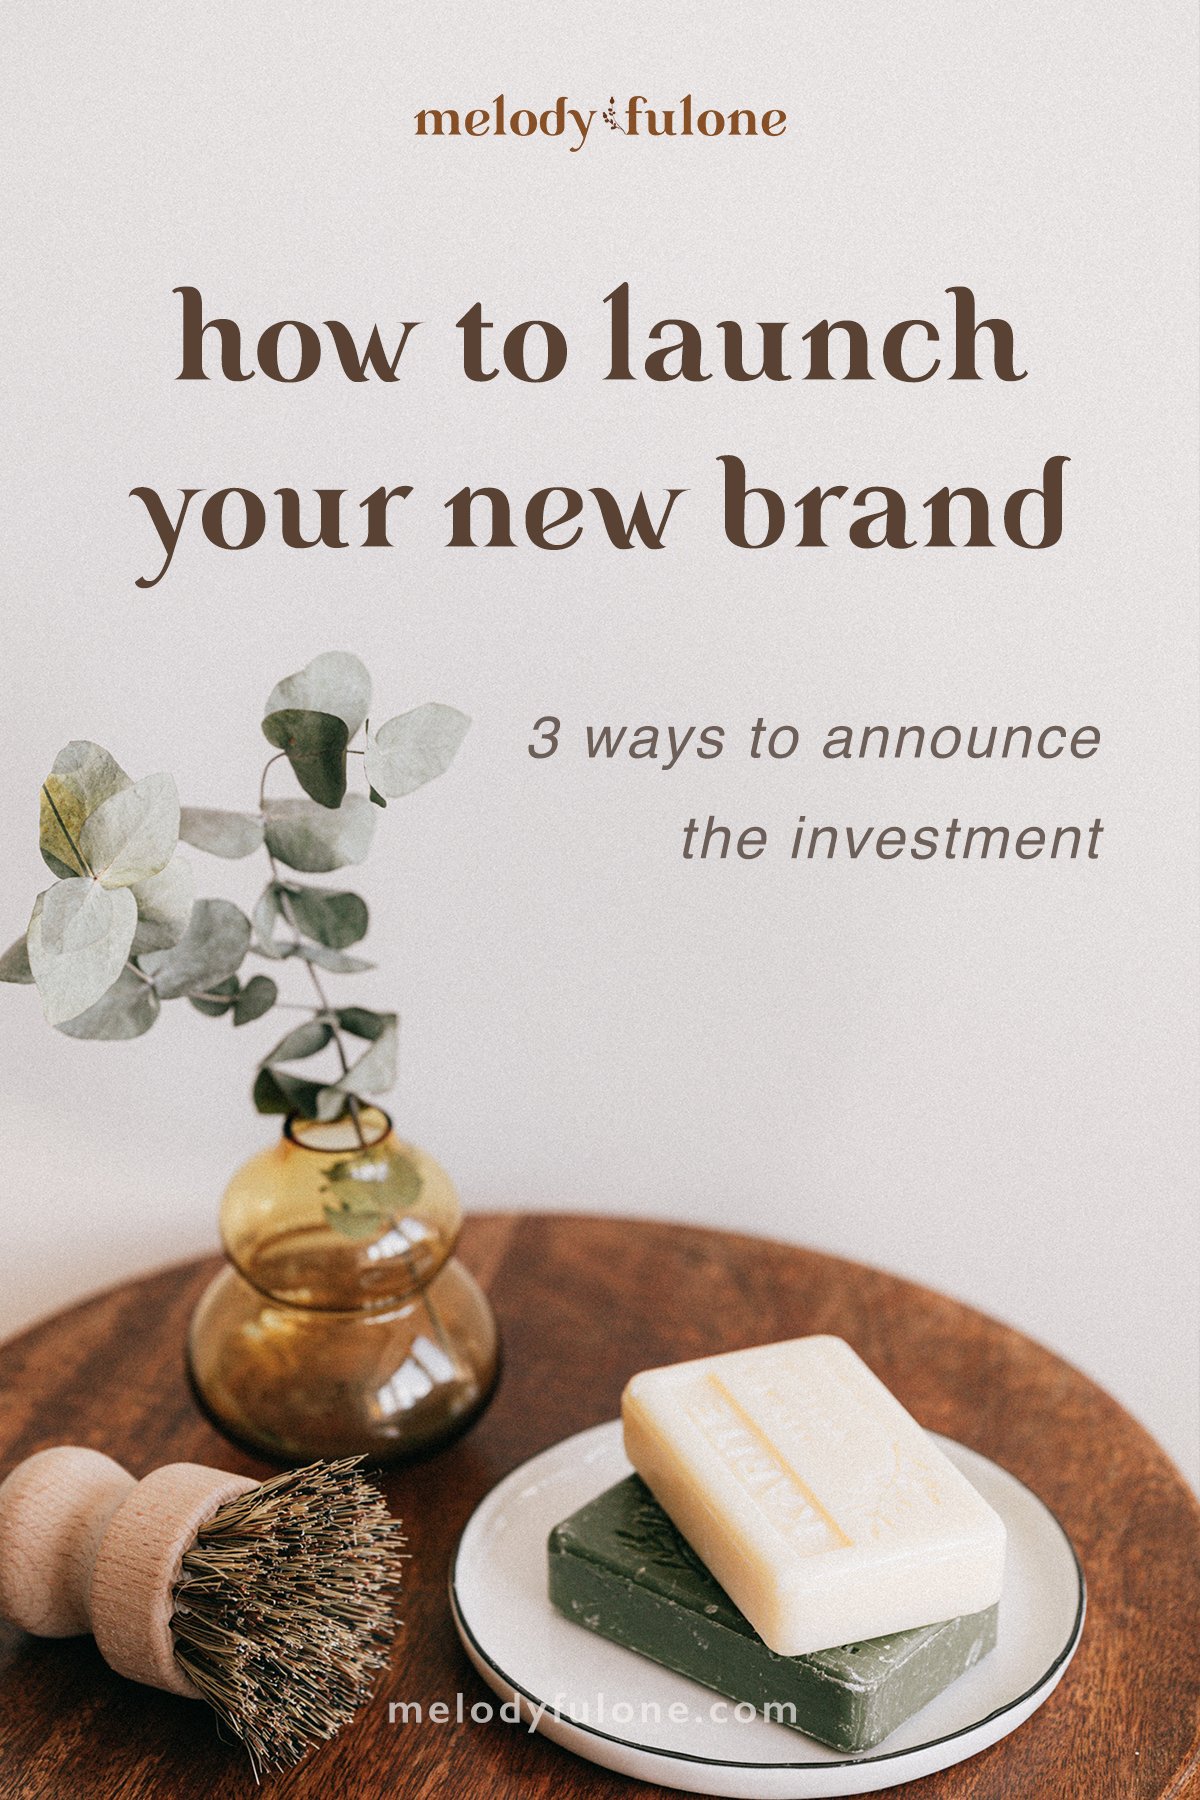 how_to_launch_brand4.jpg